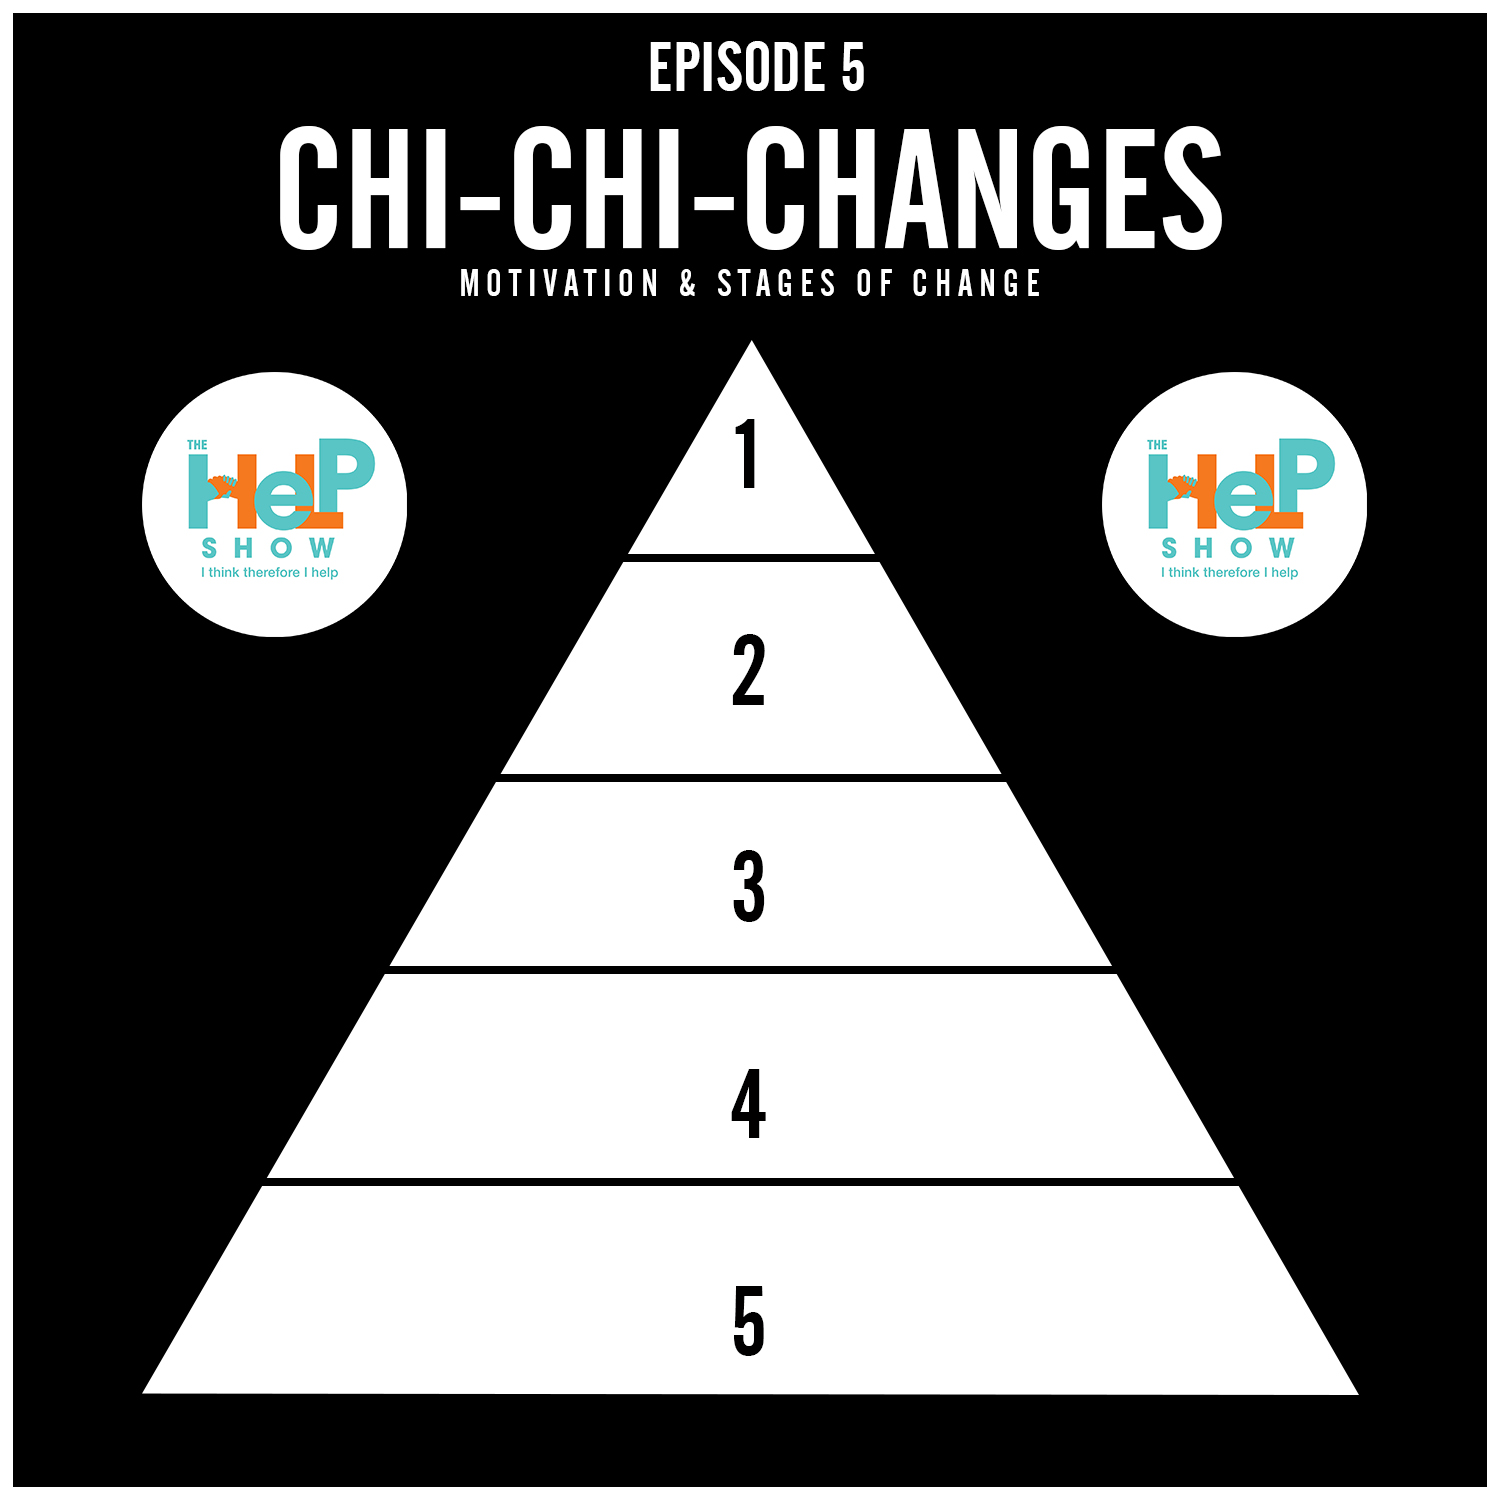 CHI-CHI-CHANGES! Episode 5: Part One Introduction with David Babbs